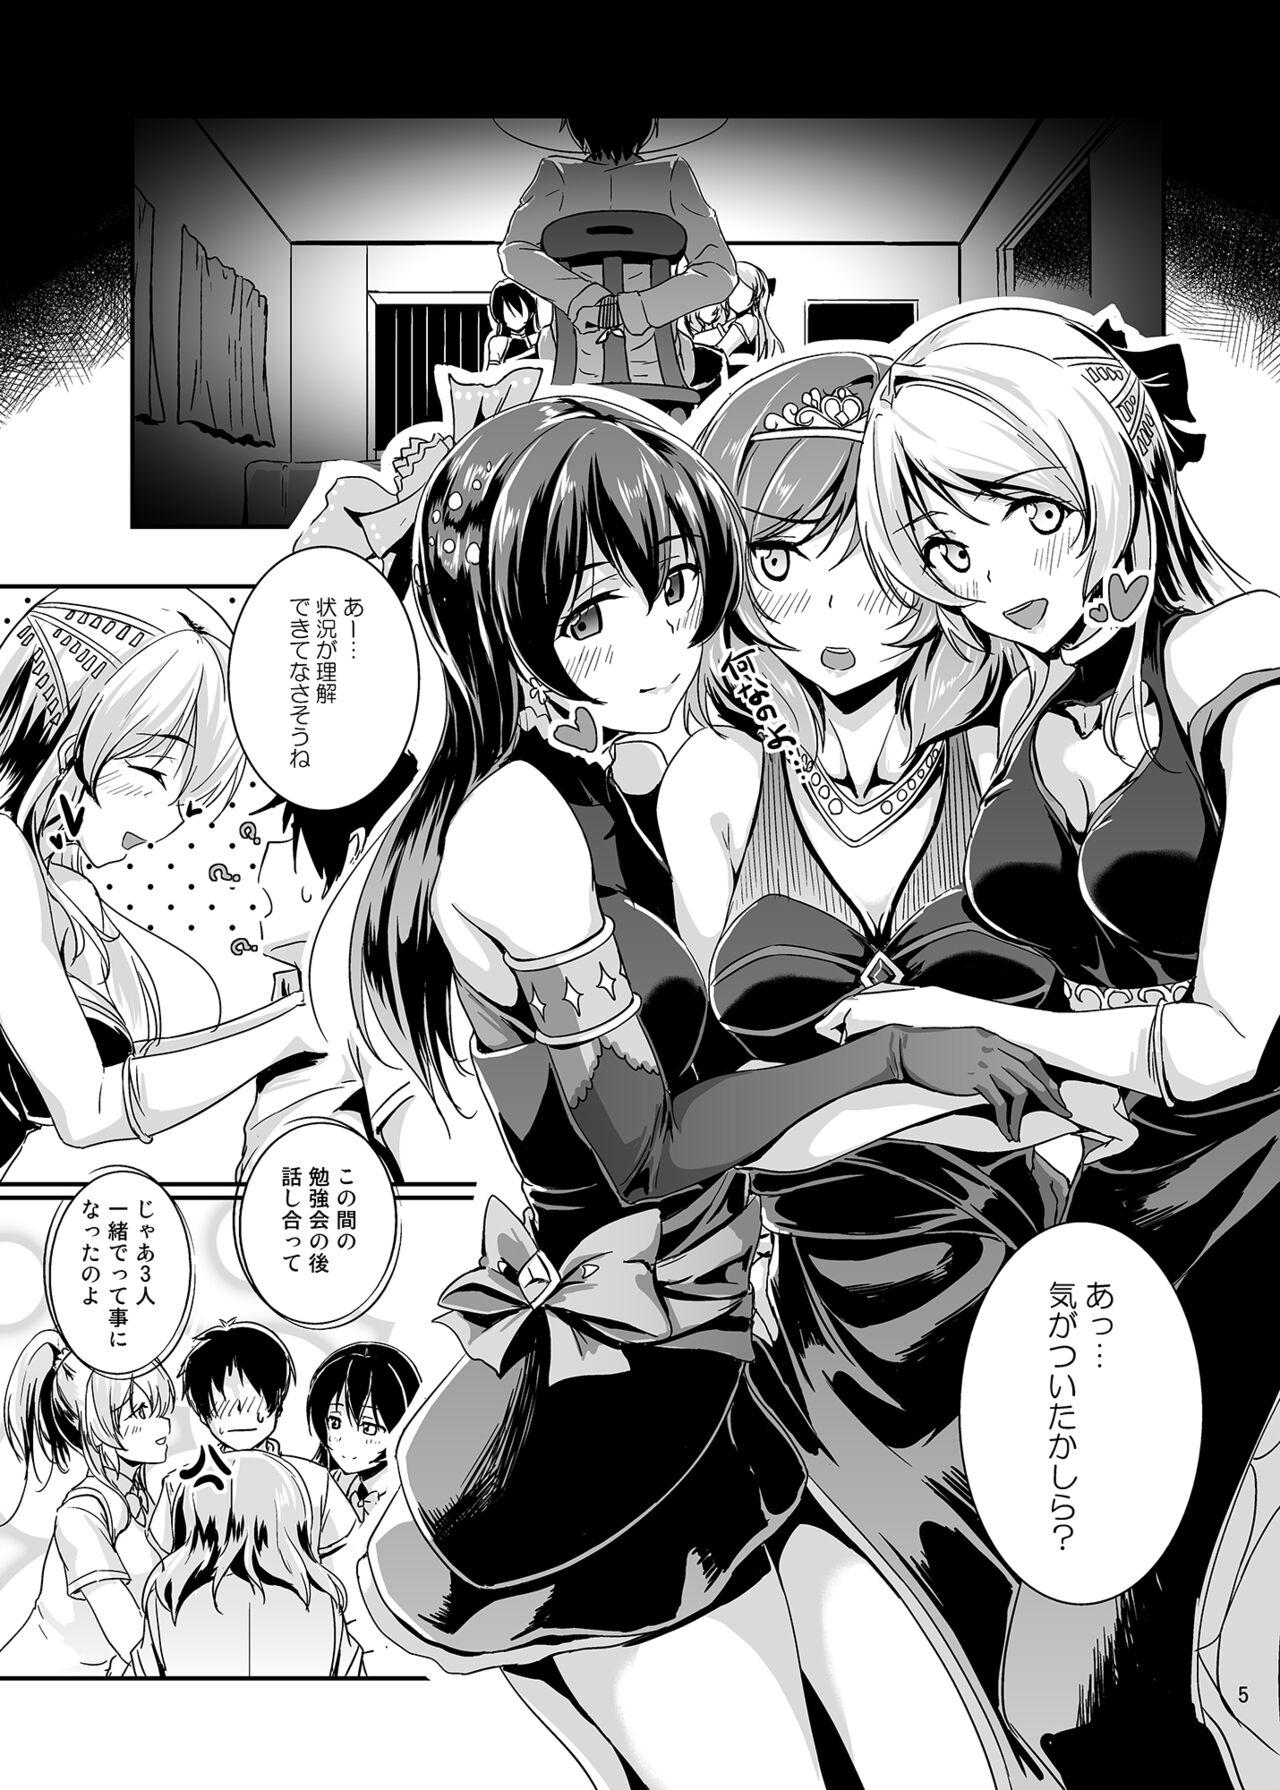 Russian secret in my heart - Love live Amigos - Page 5